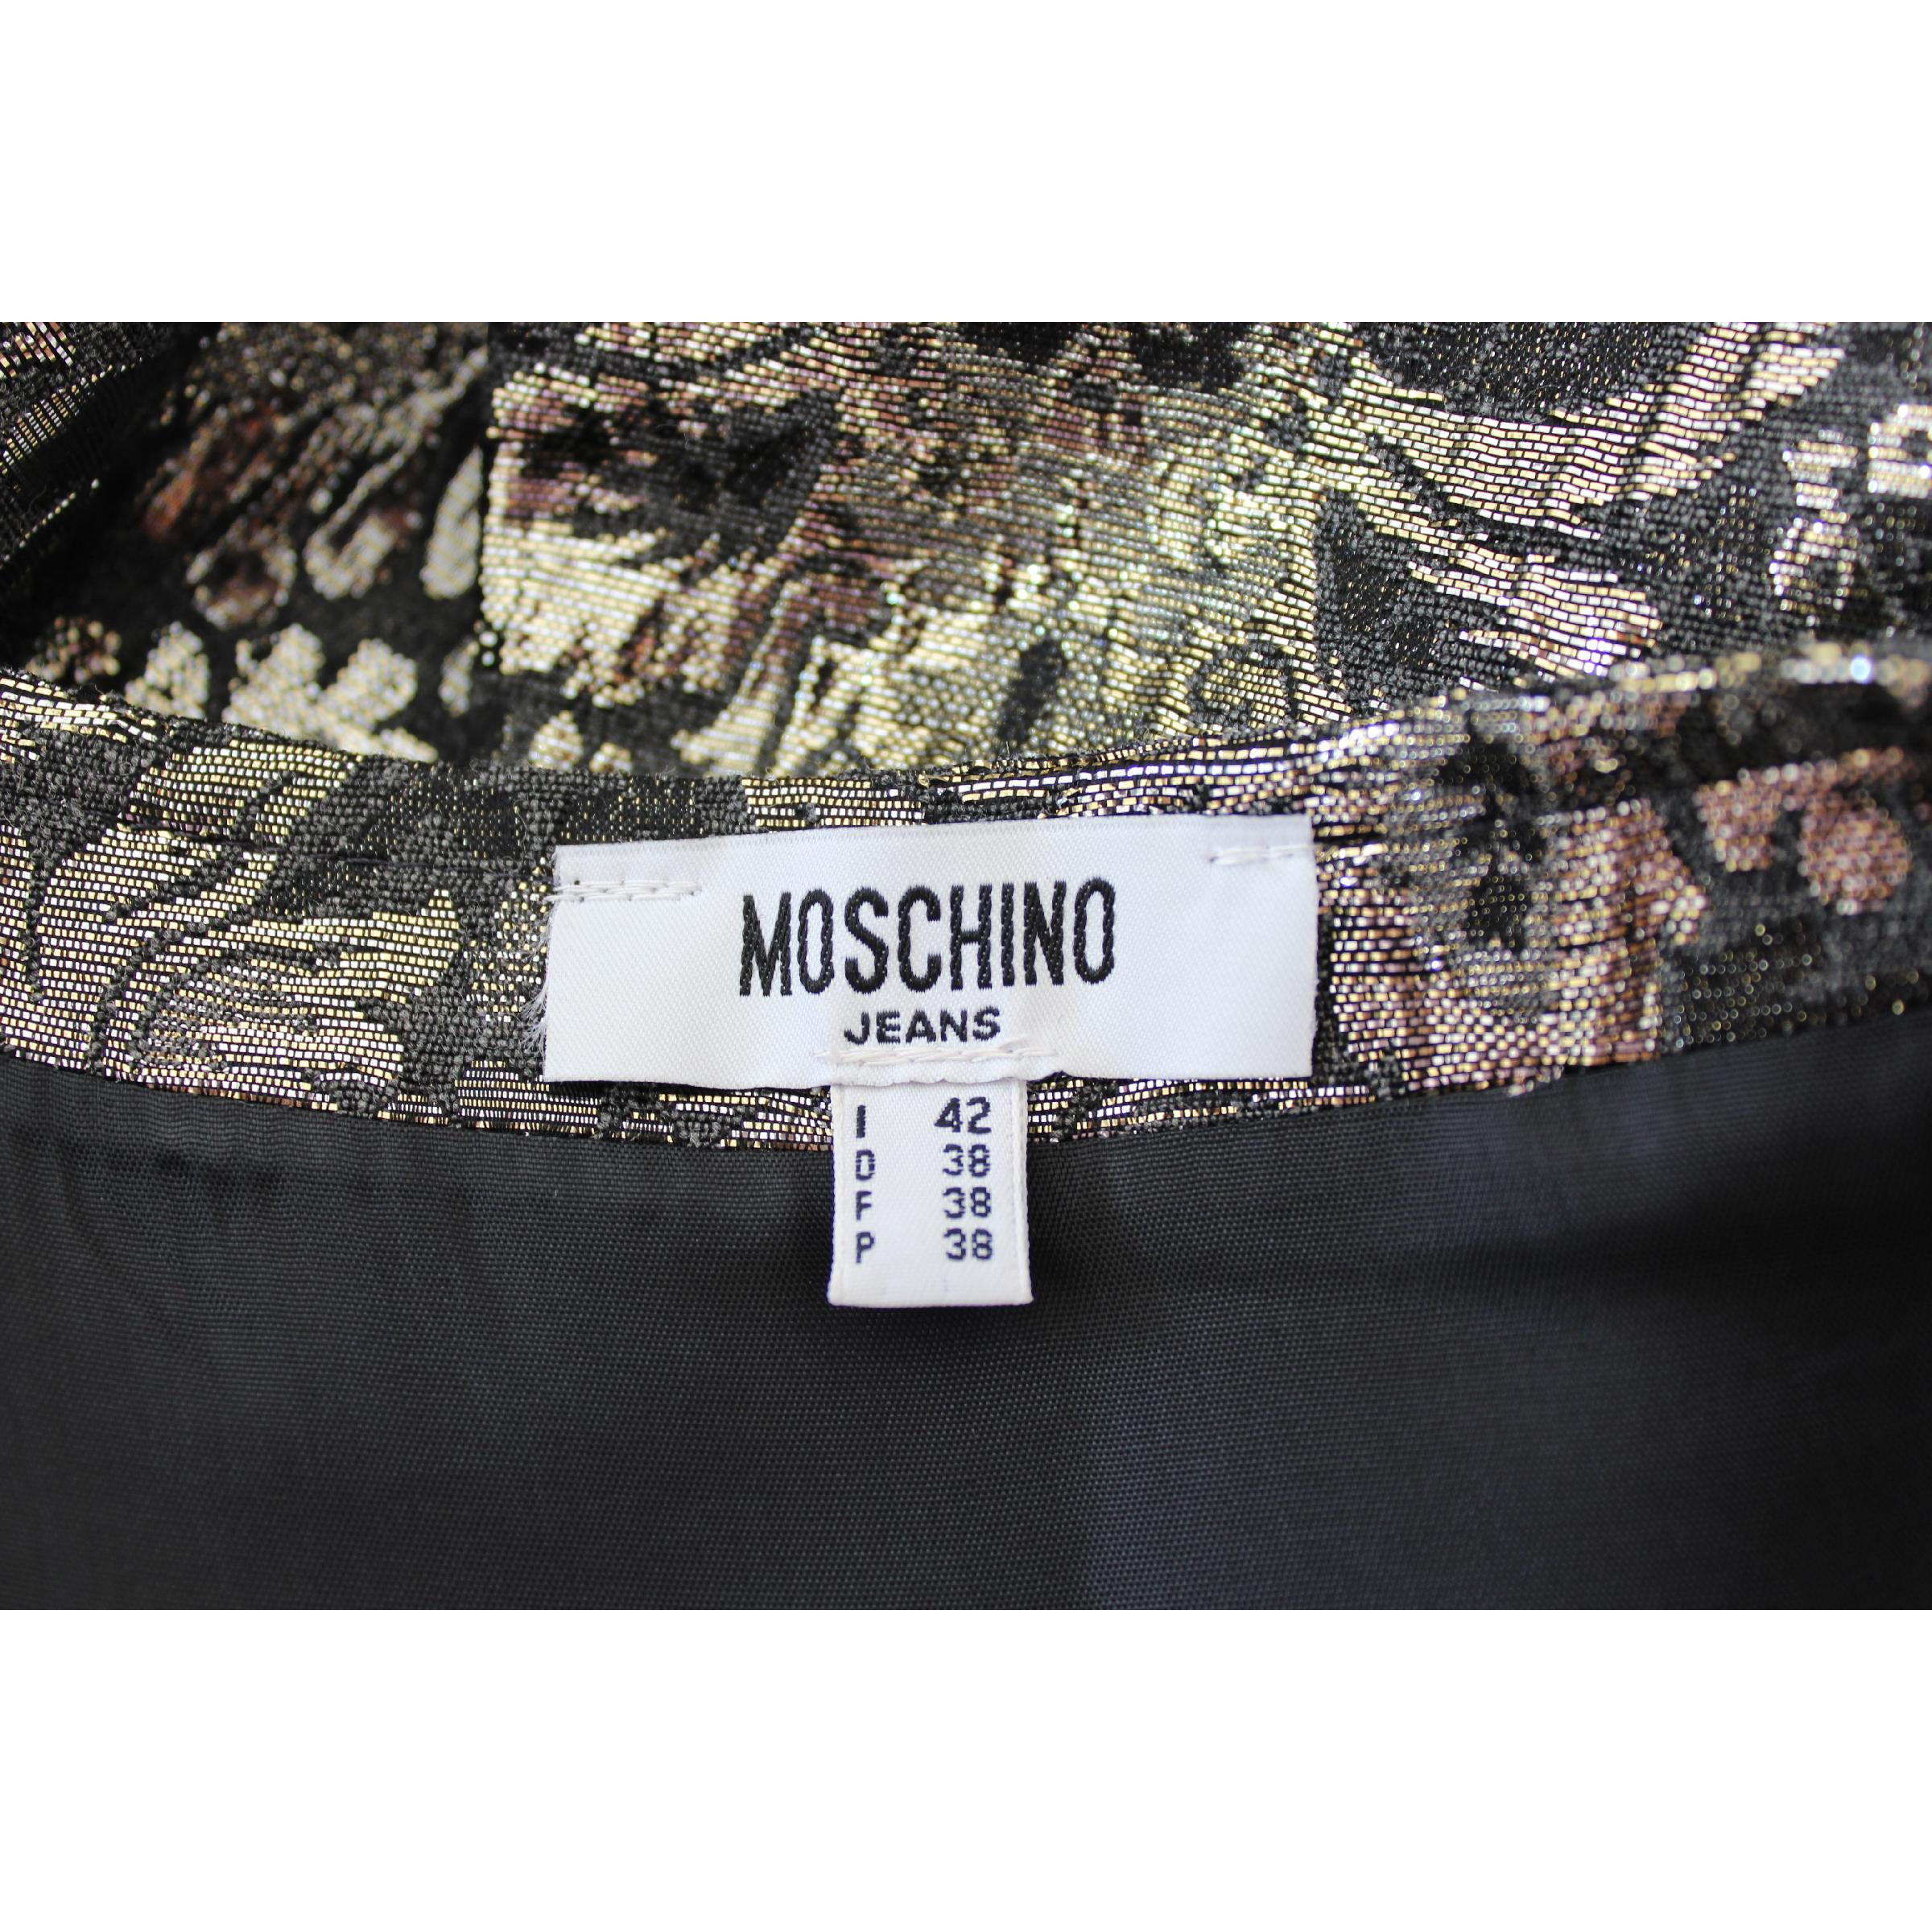 Moschino Black Lame Floral Sleeveless Sheat Evening Dress 1990s For Sale 1